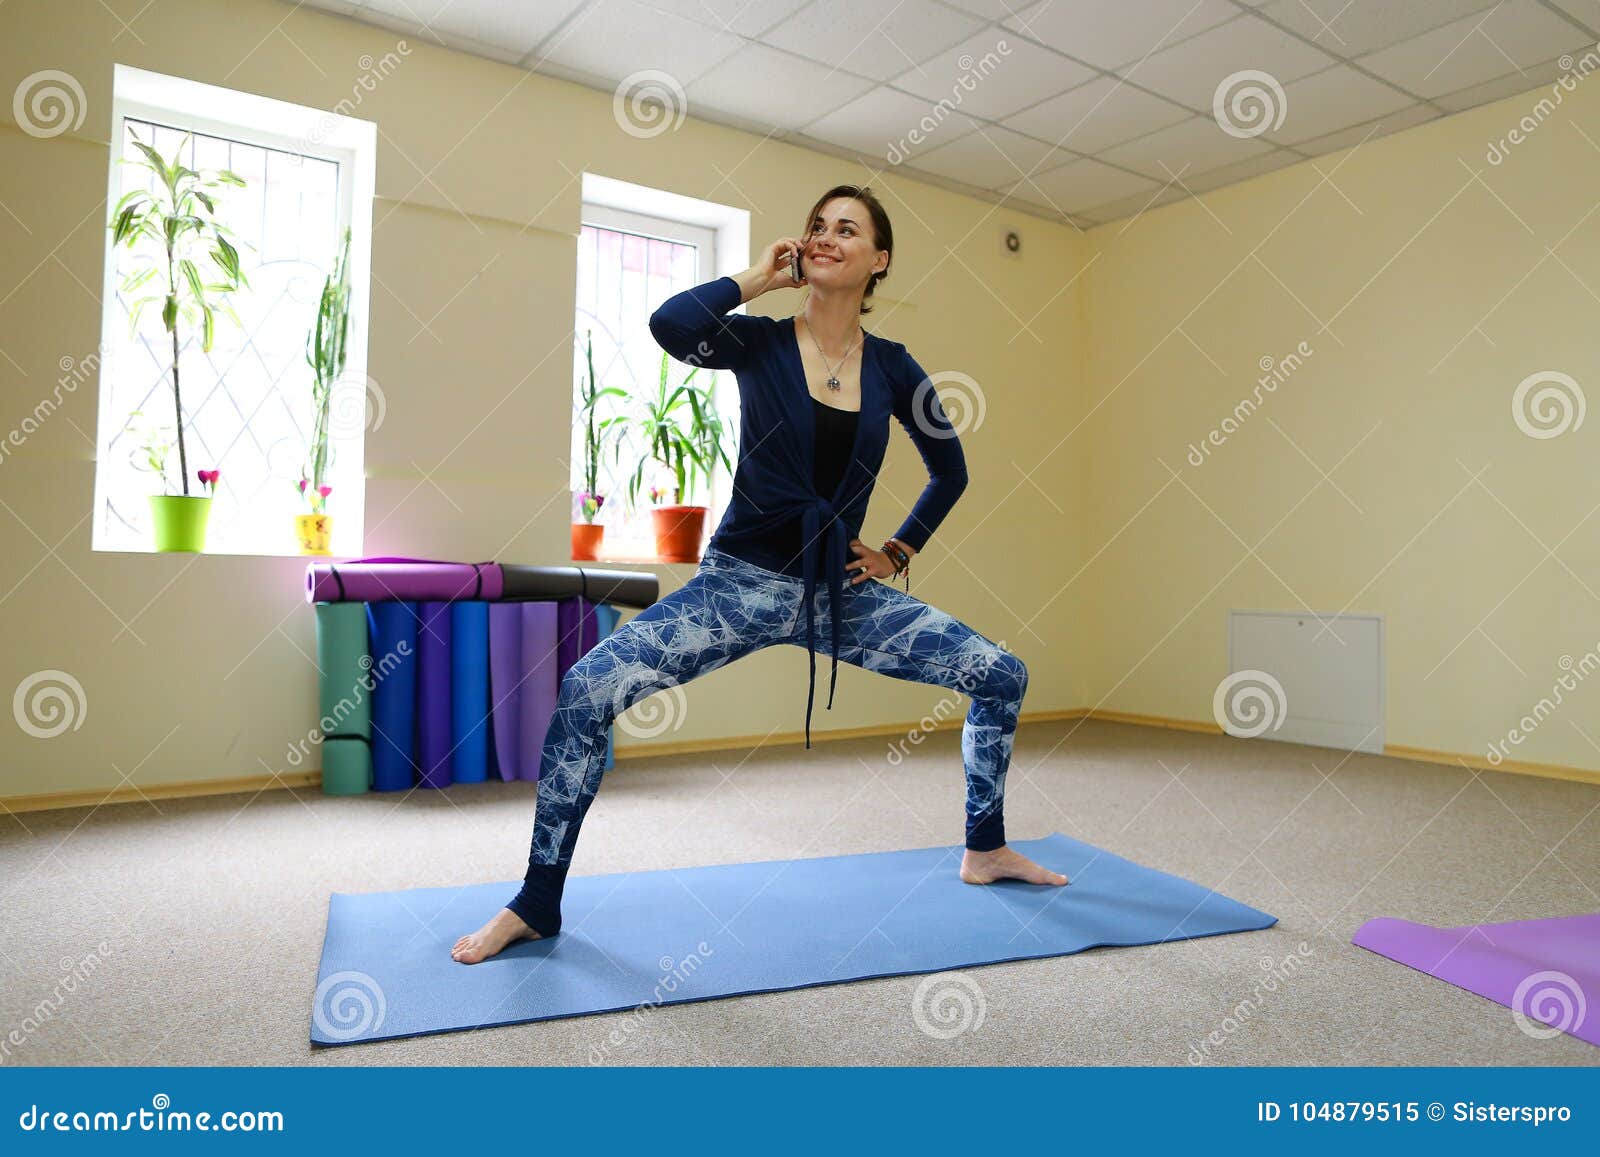 Young American Girl Begins Morning Practice before Work Stock Image ...